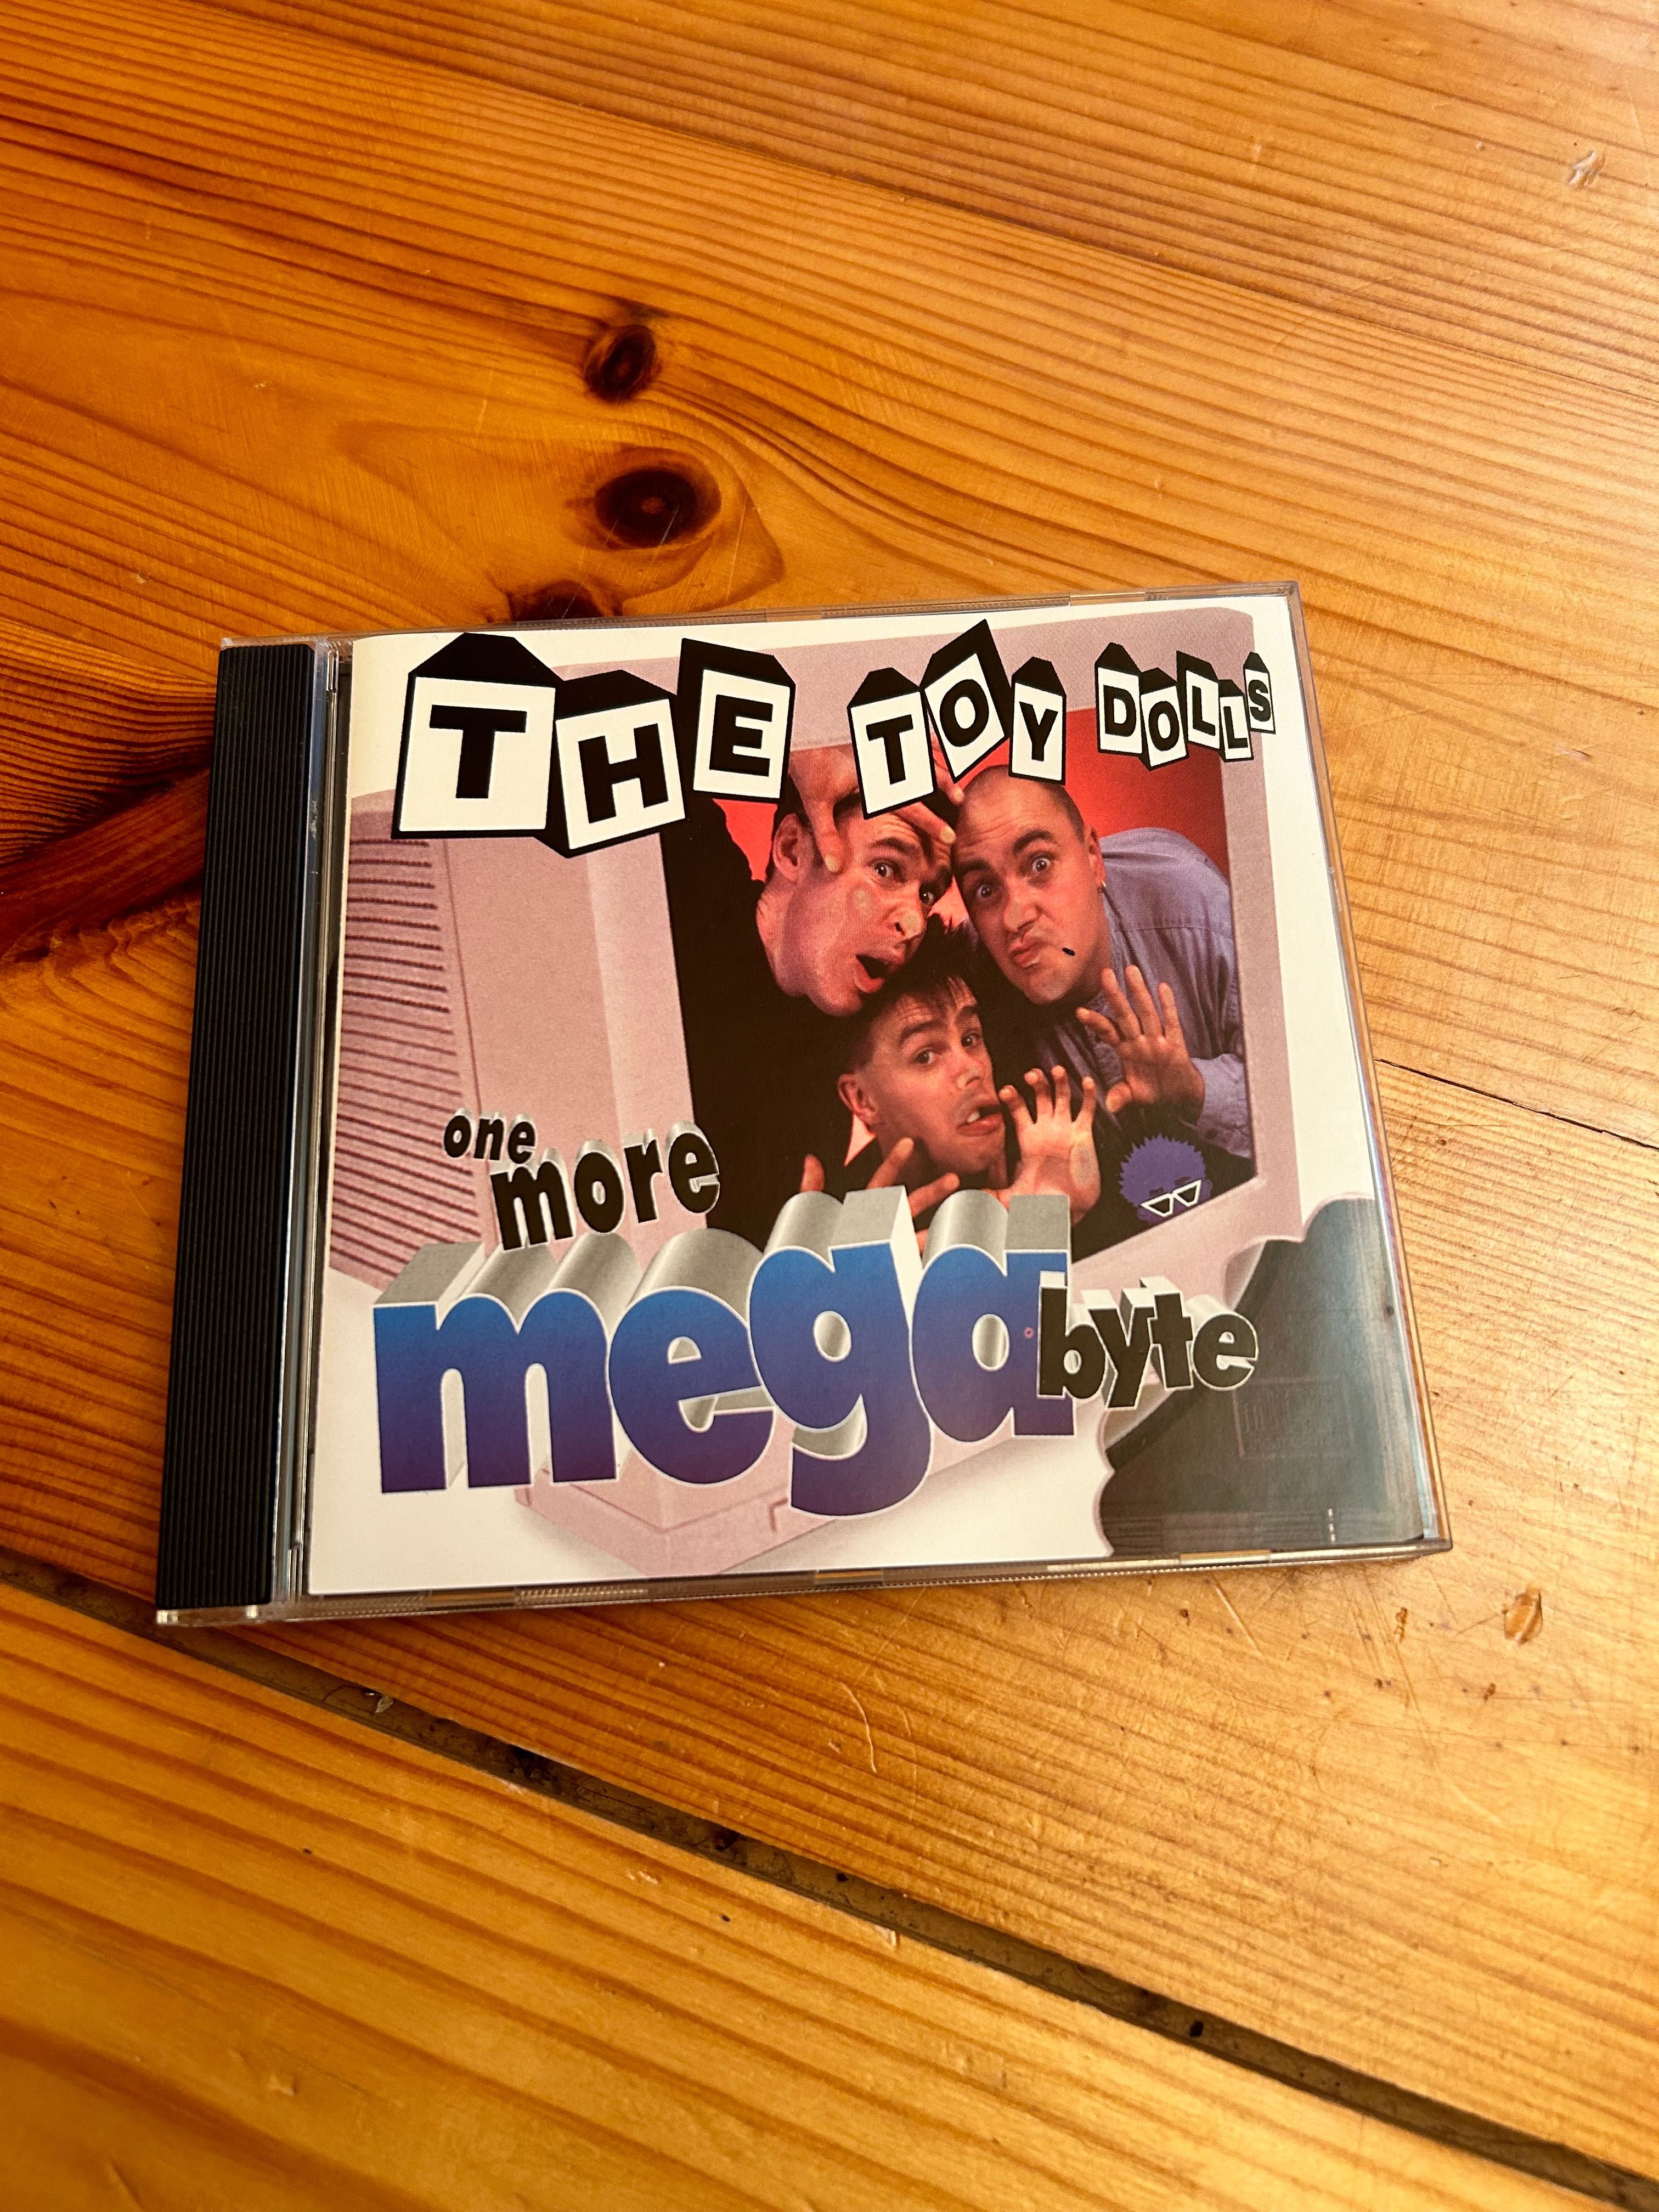 The Toy Dolls - one more mega byte CD